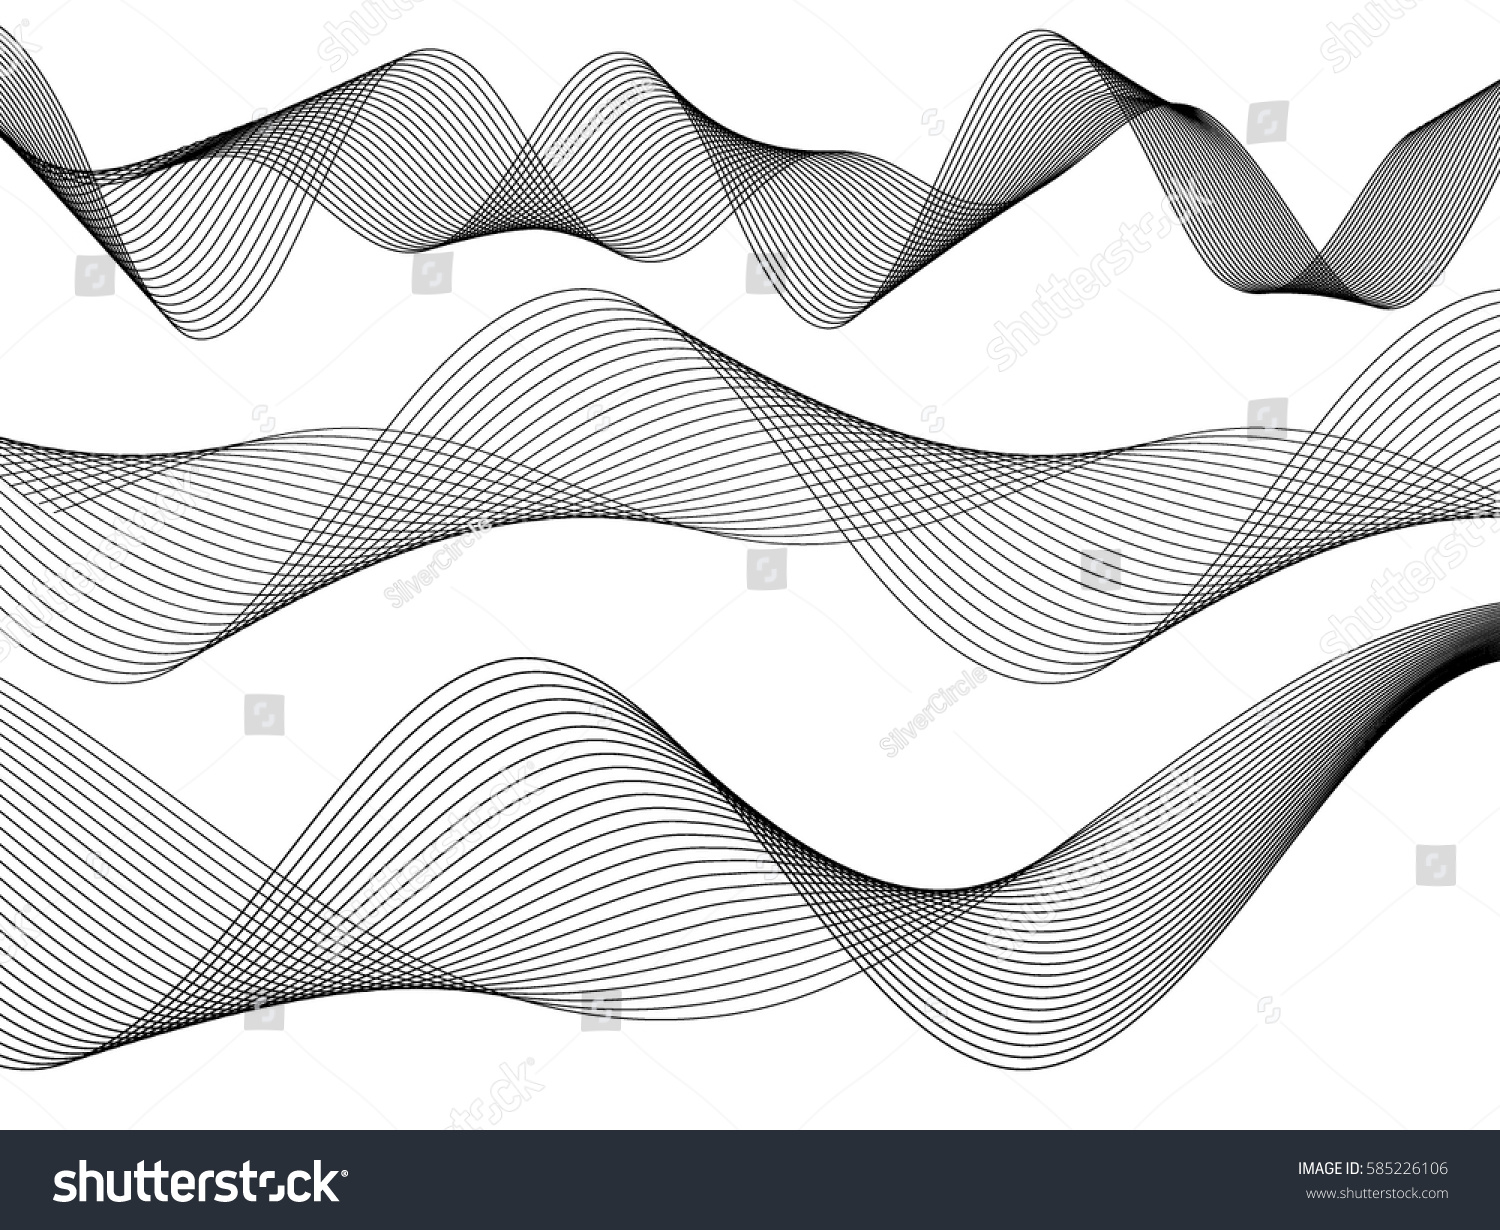 SVG of Design elements. Wave of many gray lines. Abstract wavy stripes on white background isolated. Creative line art. Vector illustration EPS 10. Colourful shiny waves with lines created using Blend Tool.  svg